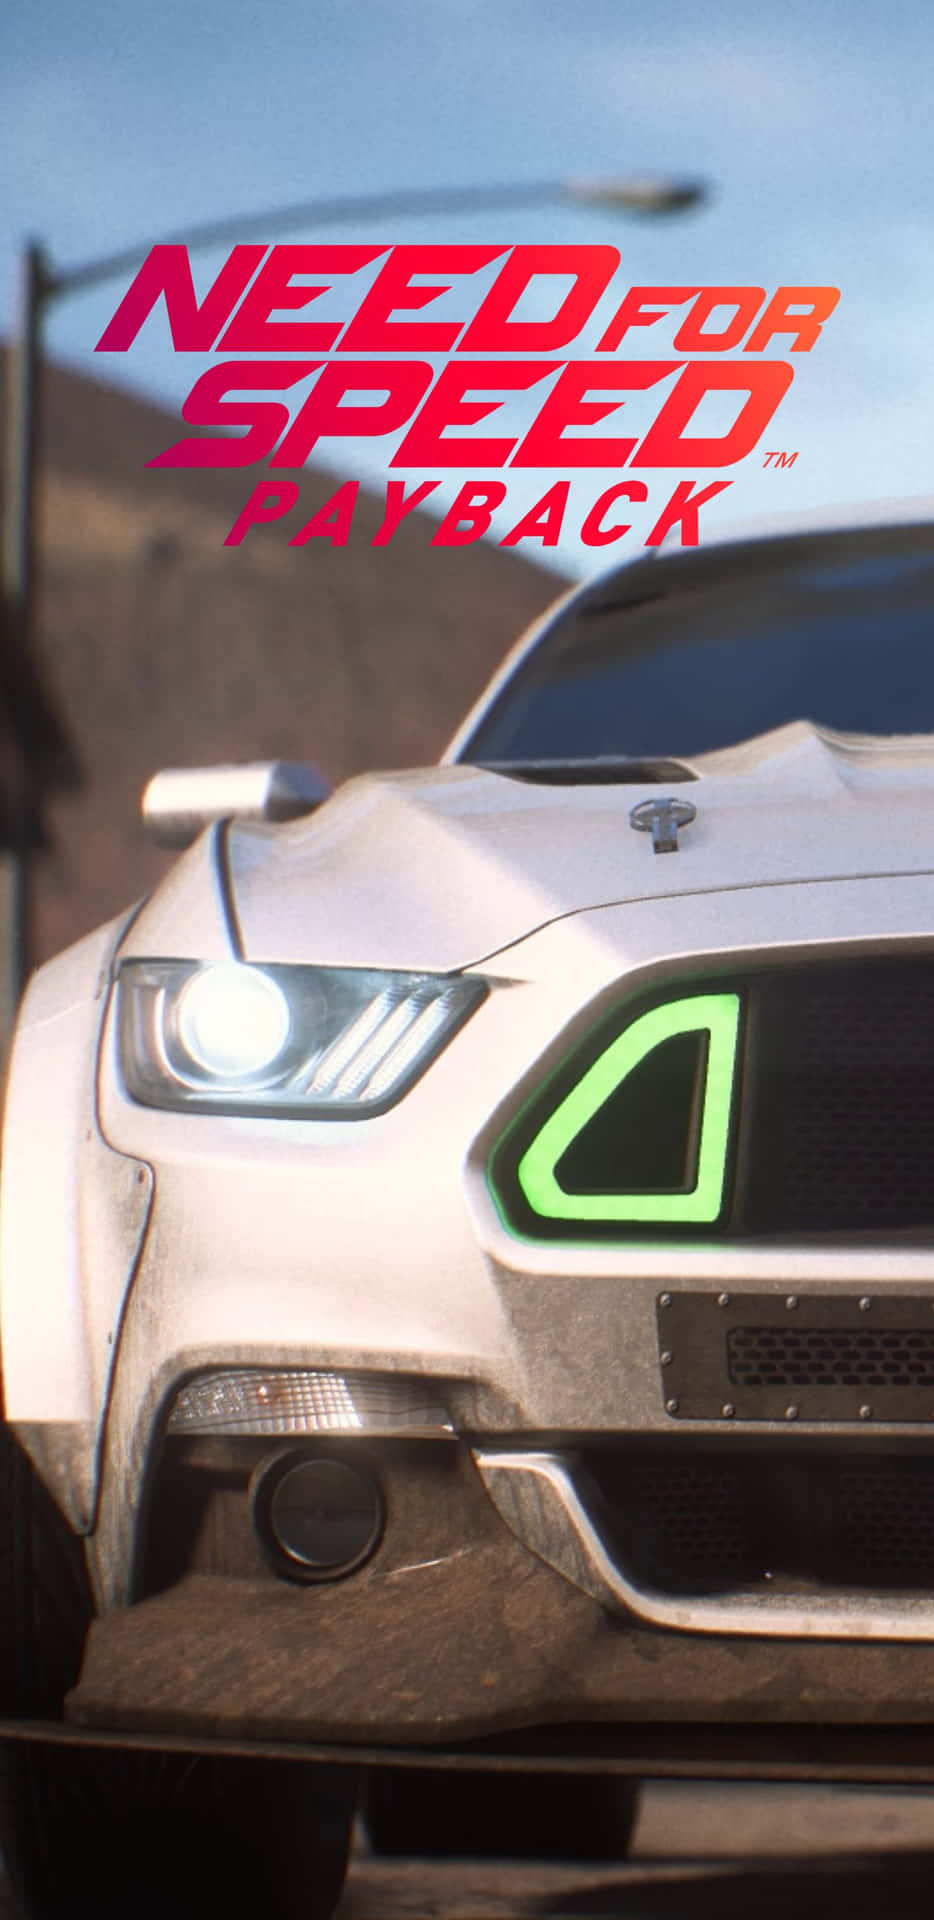 Conquer the race with Need For Speed Payback on your Pixel 3XL